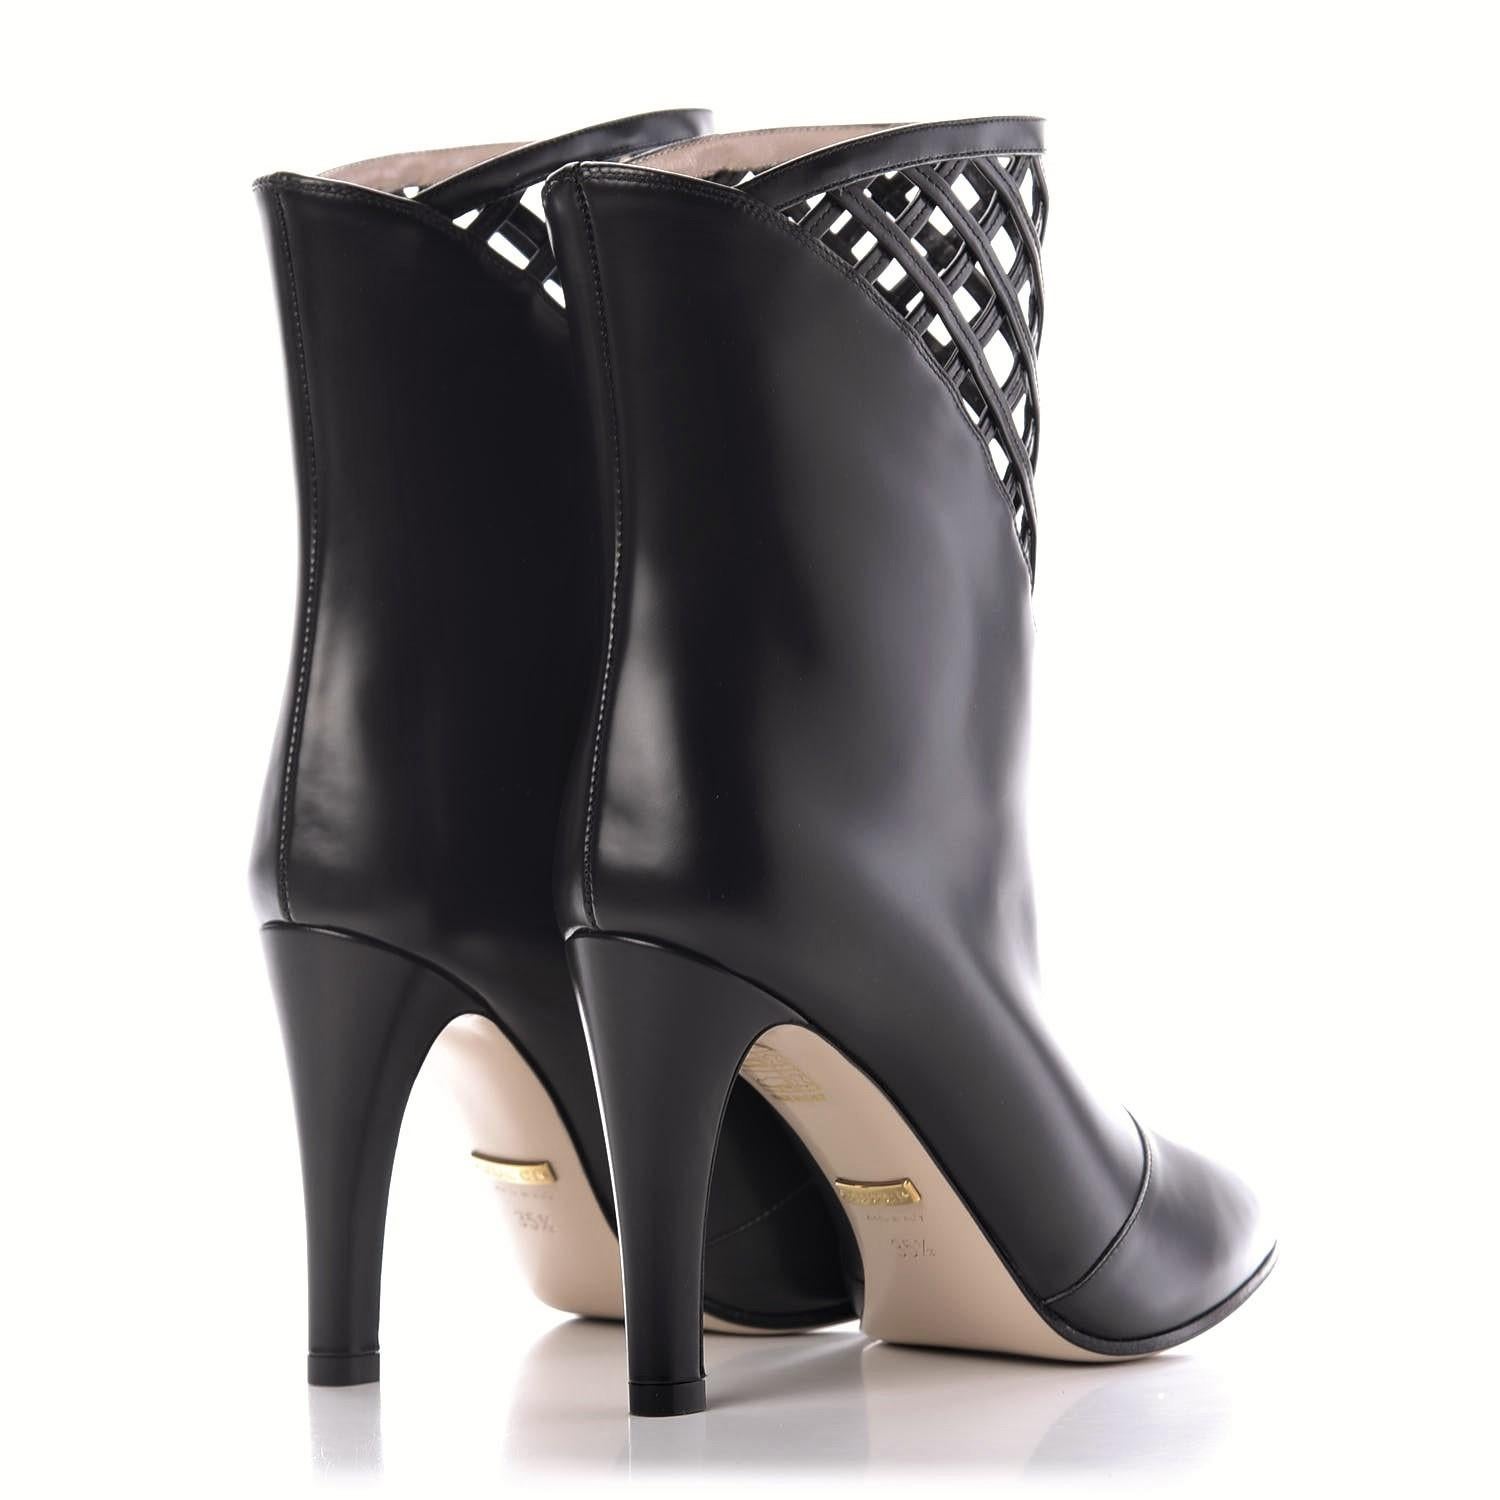 New Gucci Black Lattice Boots Booties With Box Sz 36.5 $2680 1